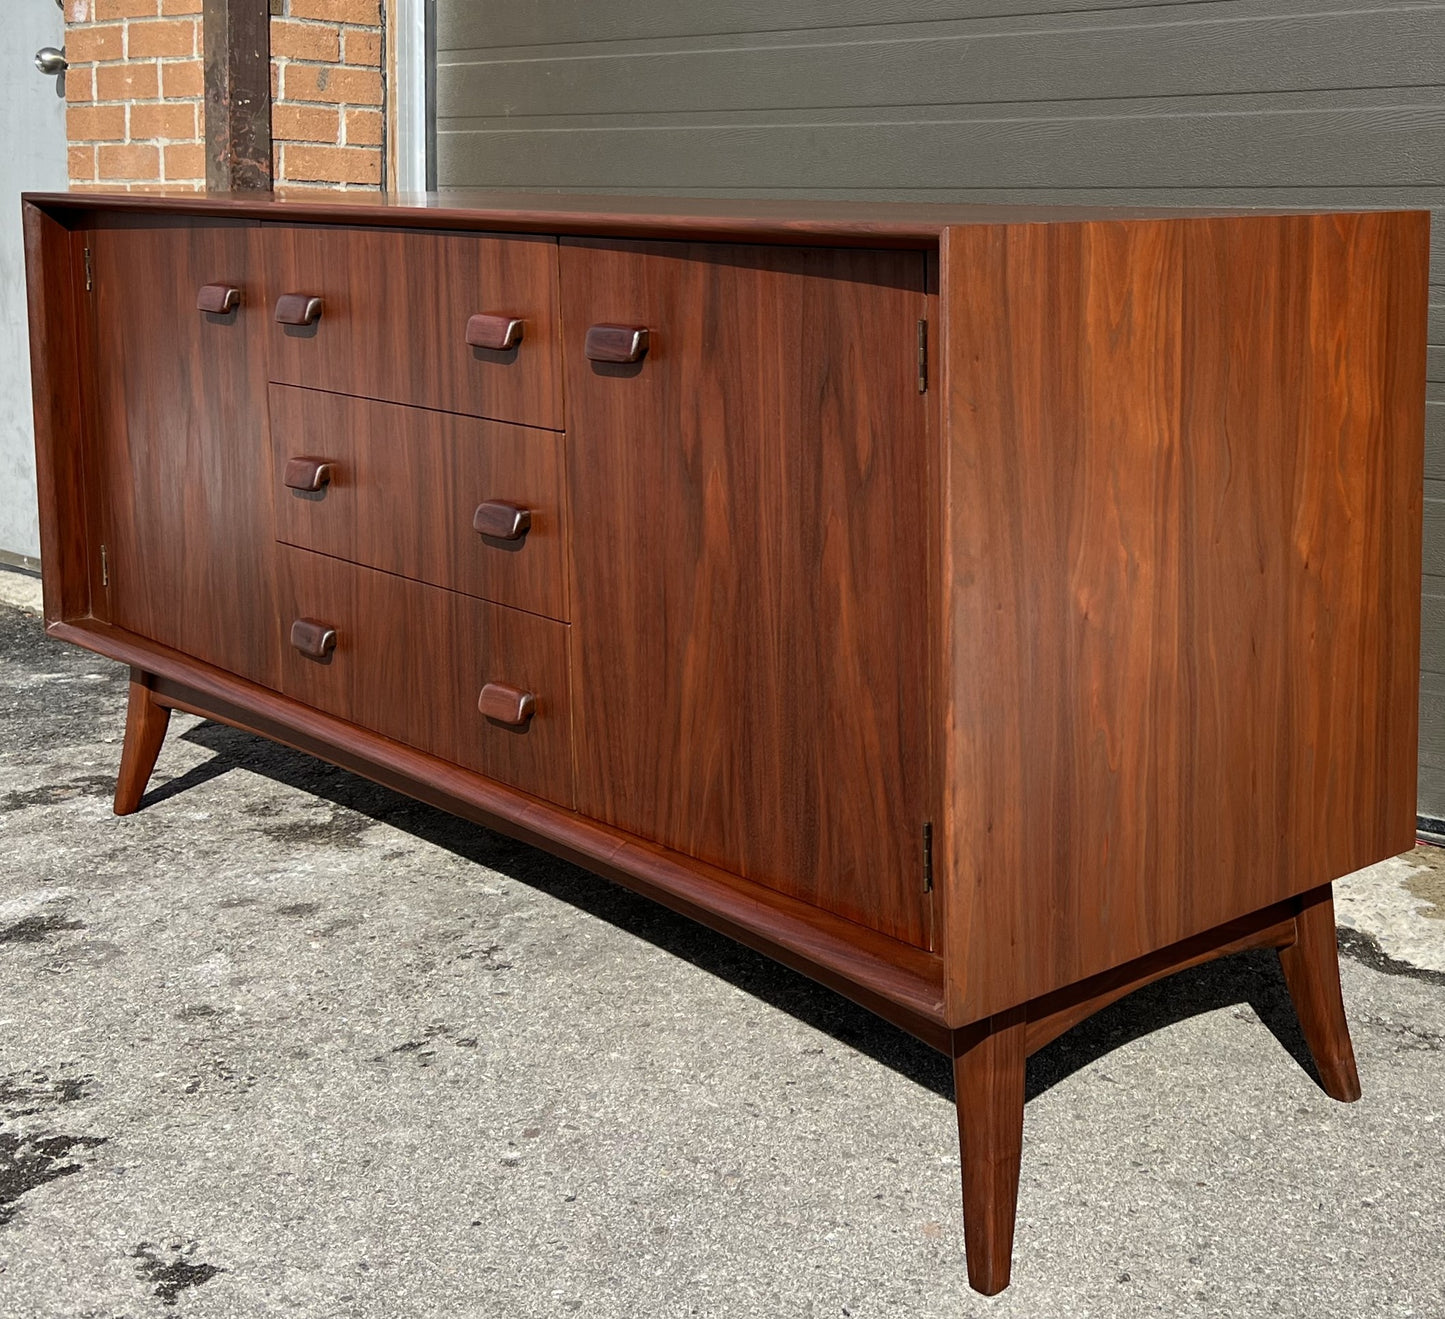 REFINISHED Mid Century Modern Walnut Sideboard by Russell Spanner, 68"